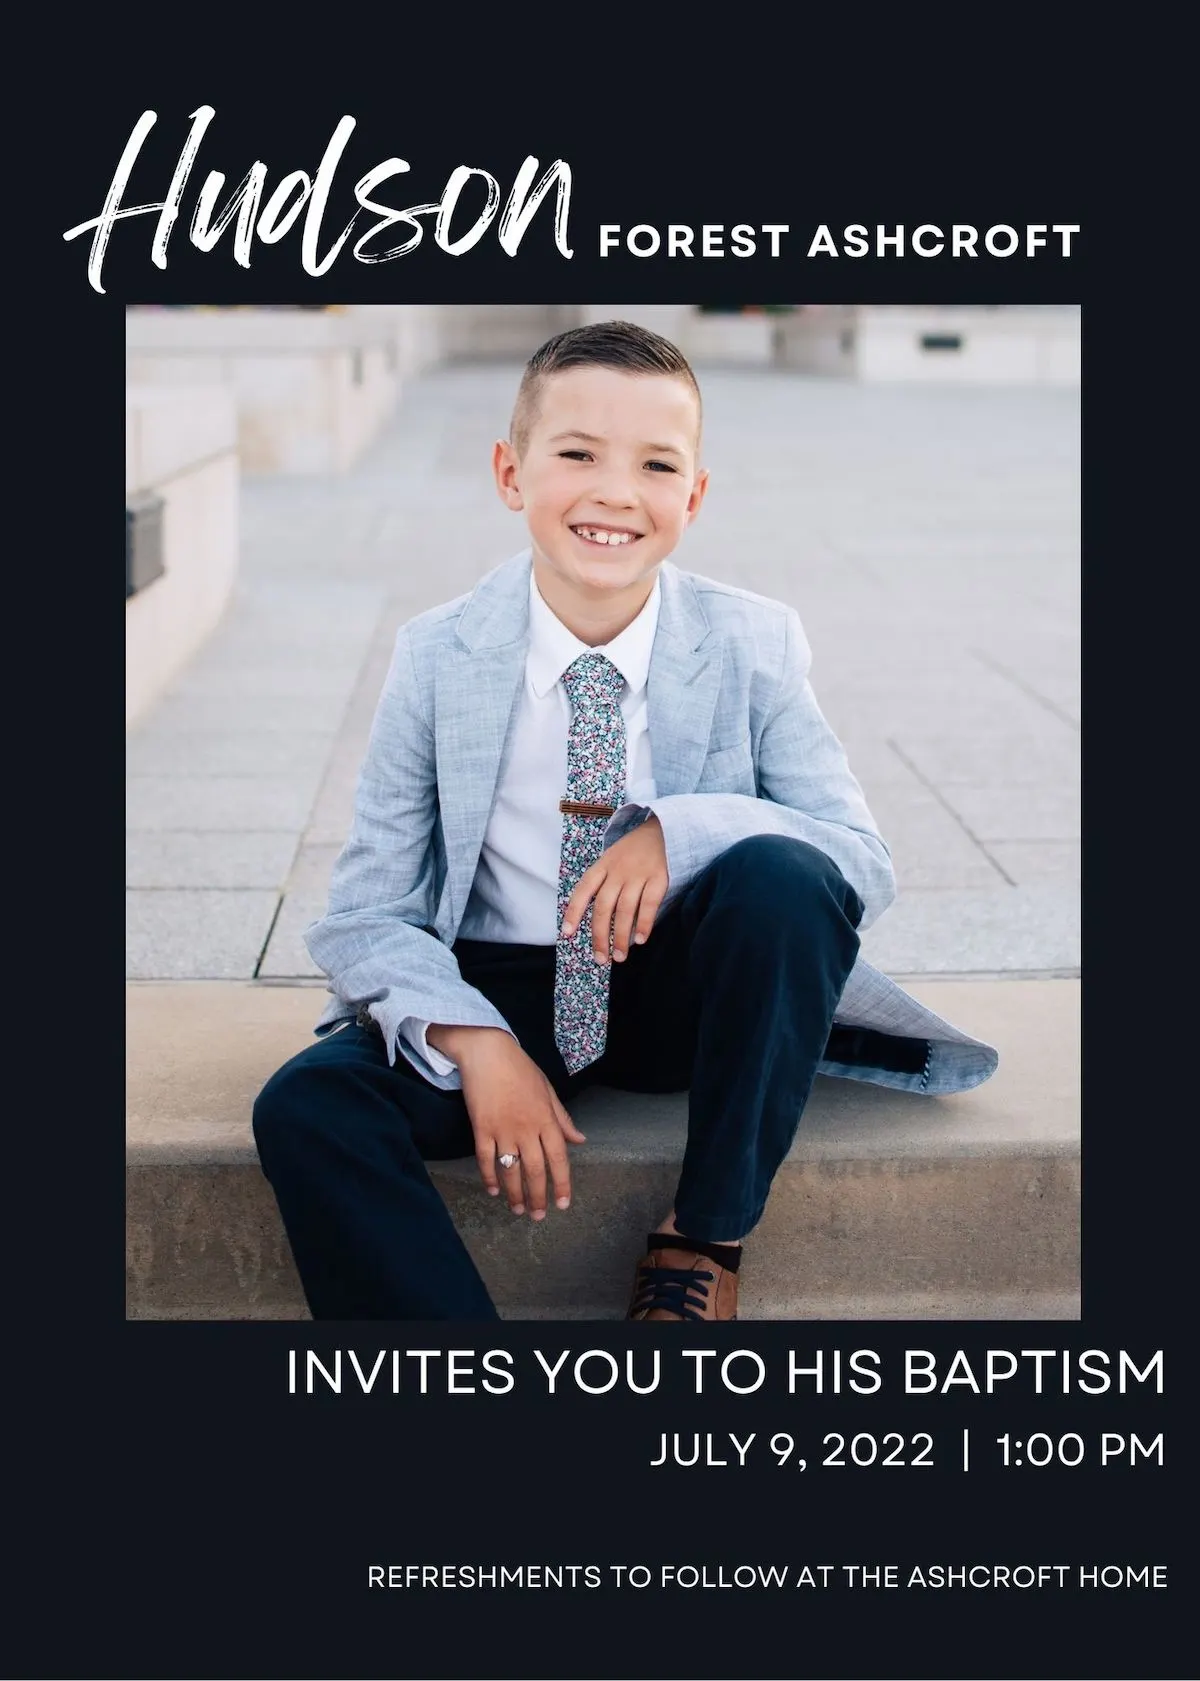 LDS baptism invitation with photo of boy smiling and text about the baptism.